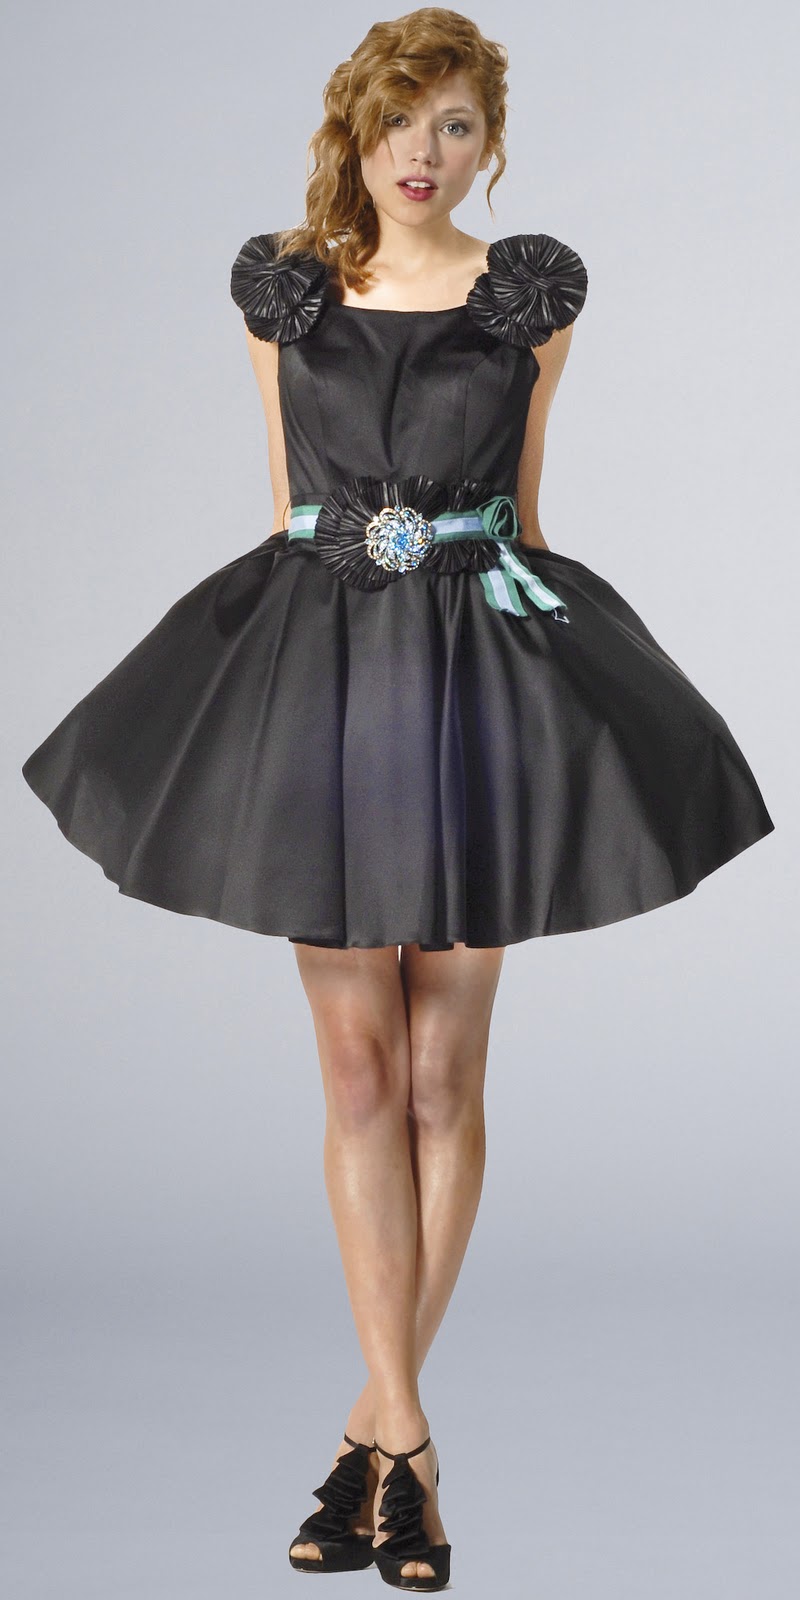 KIND OF DRESS, CLOTHES, FASHION: Fall Party Dress